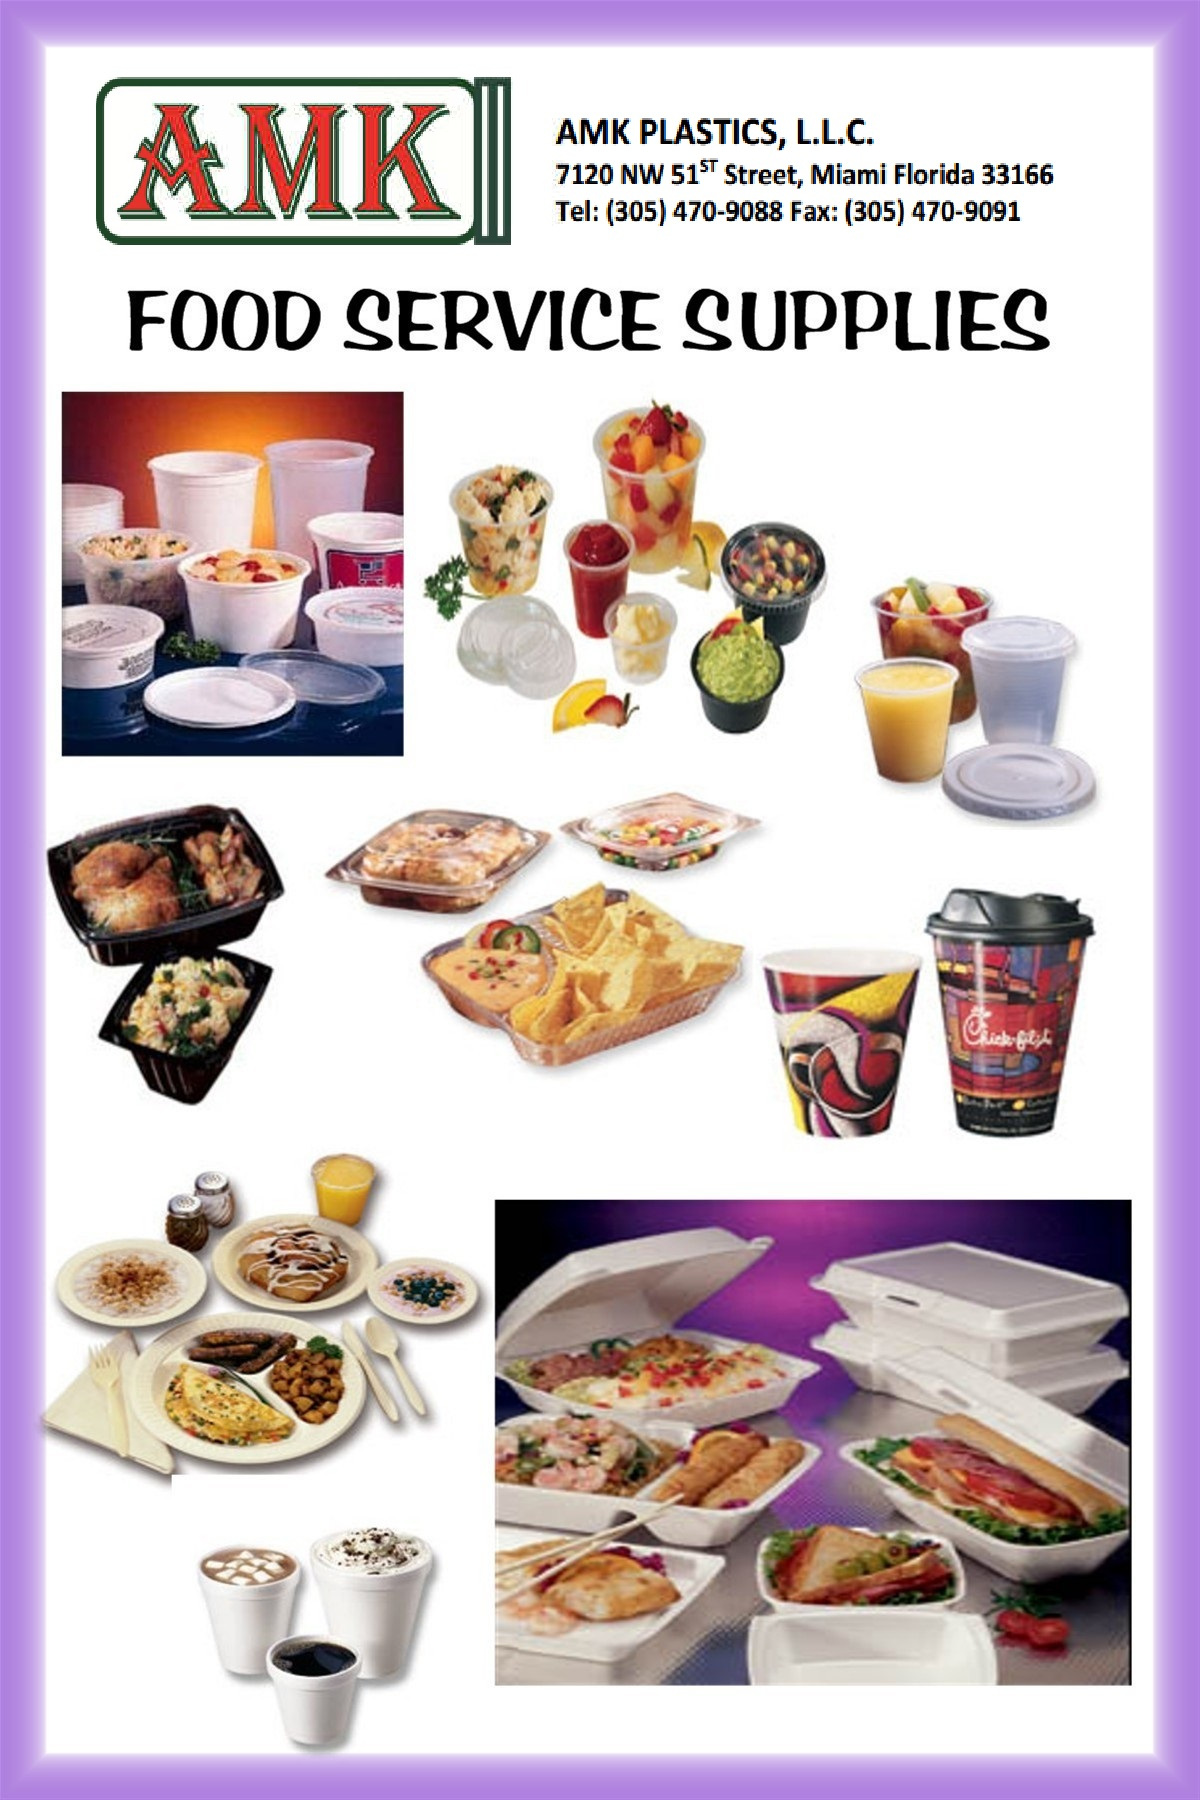 FOOD SERVICES SUPPLIES